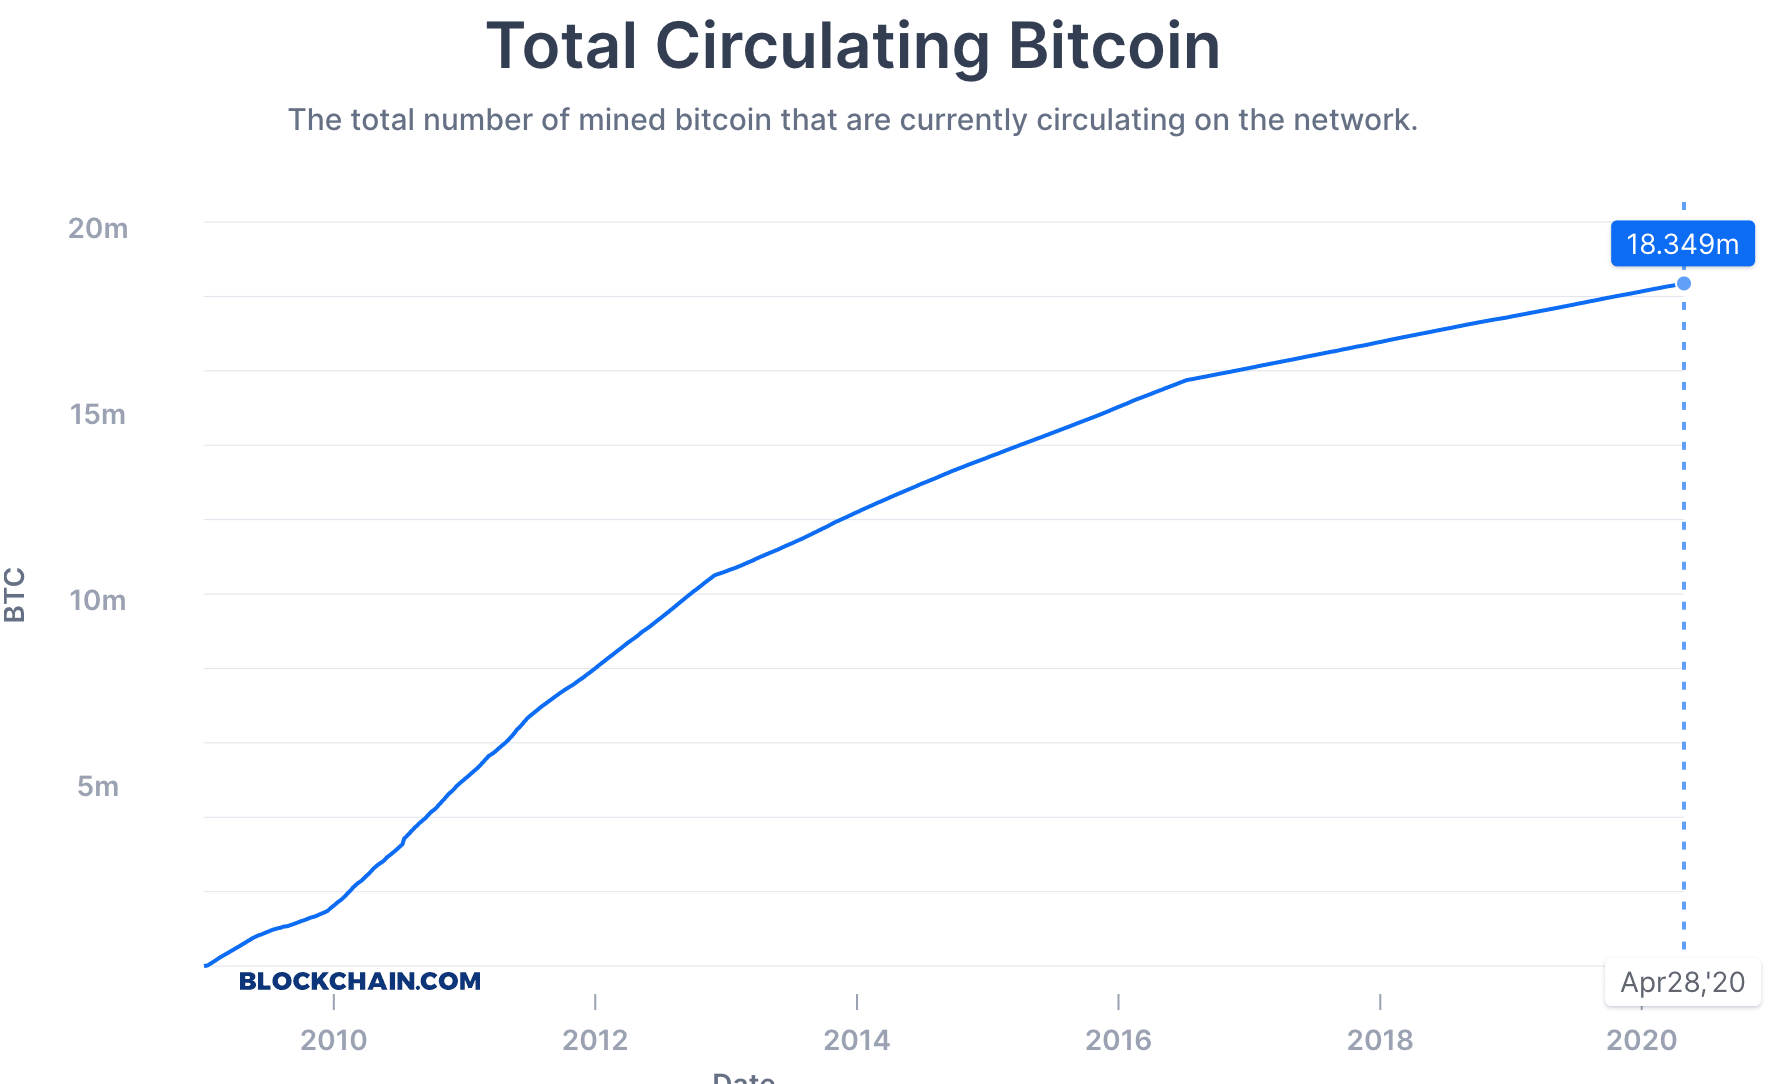 Notice the slight curves due to prior bitcoin halvenings